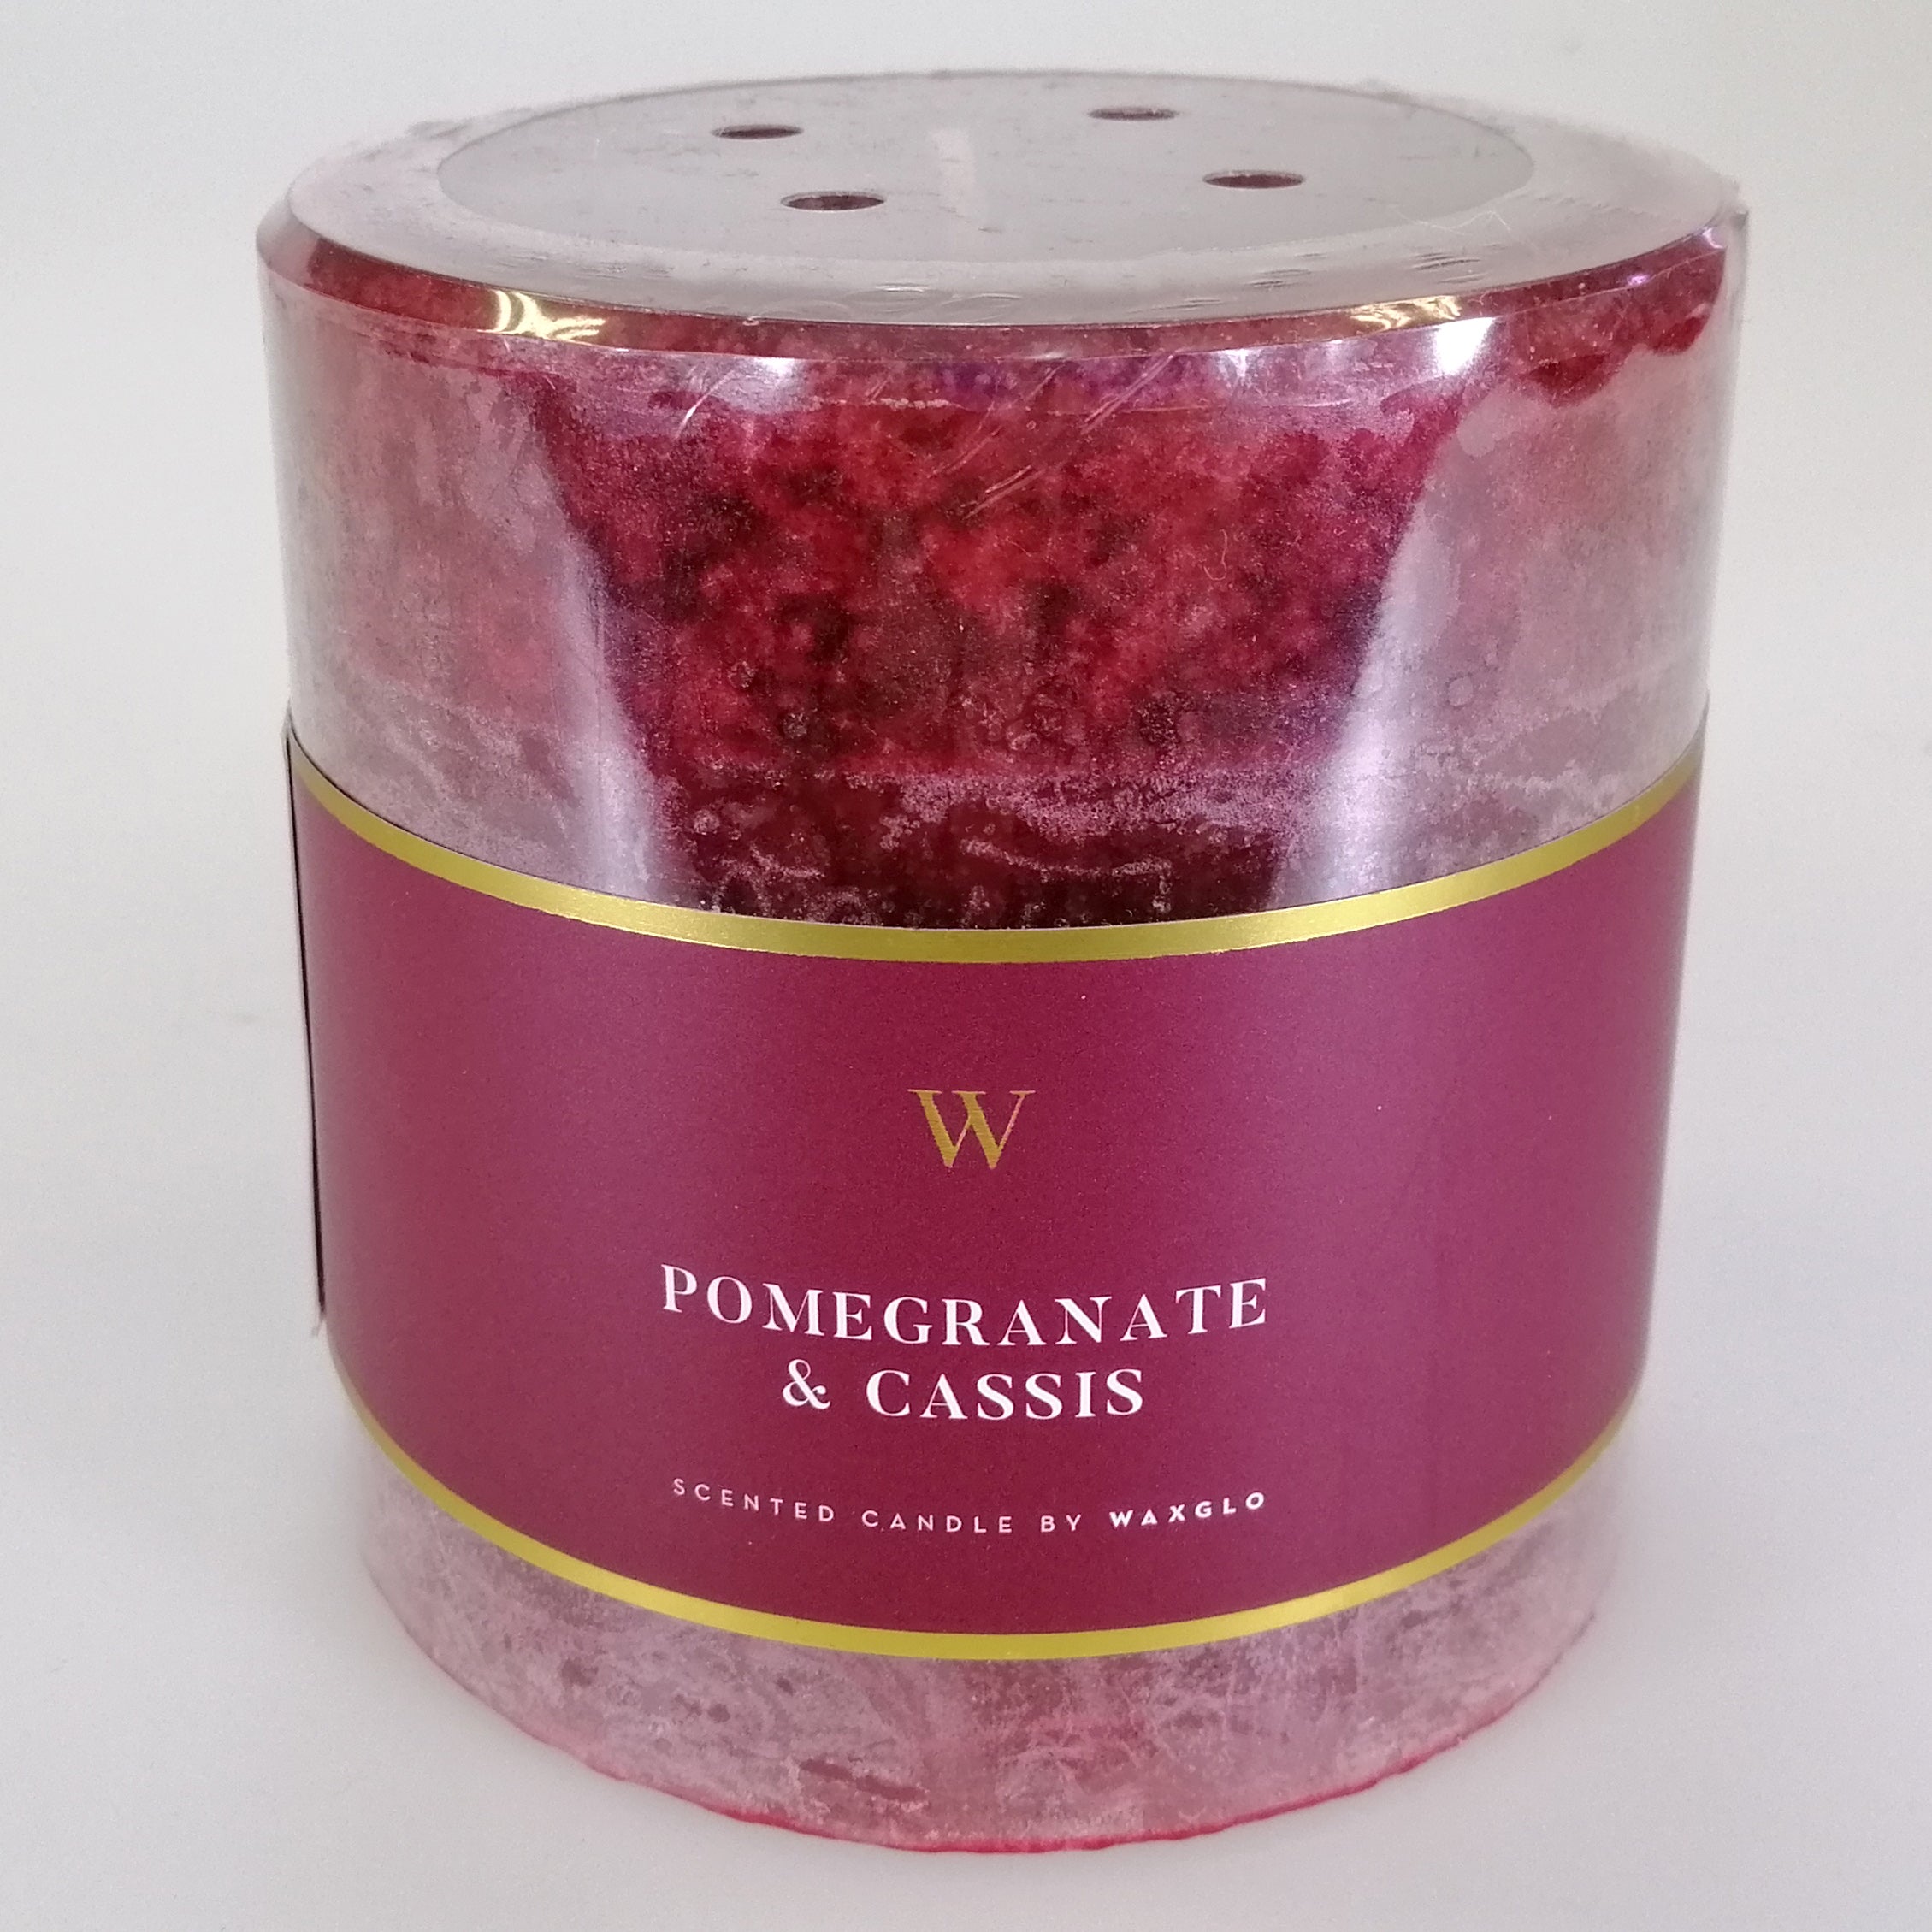 Scented Candle - 9 x 9cm - Pomegranate & Cassis